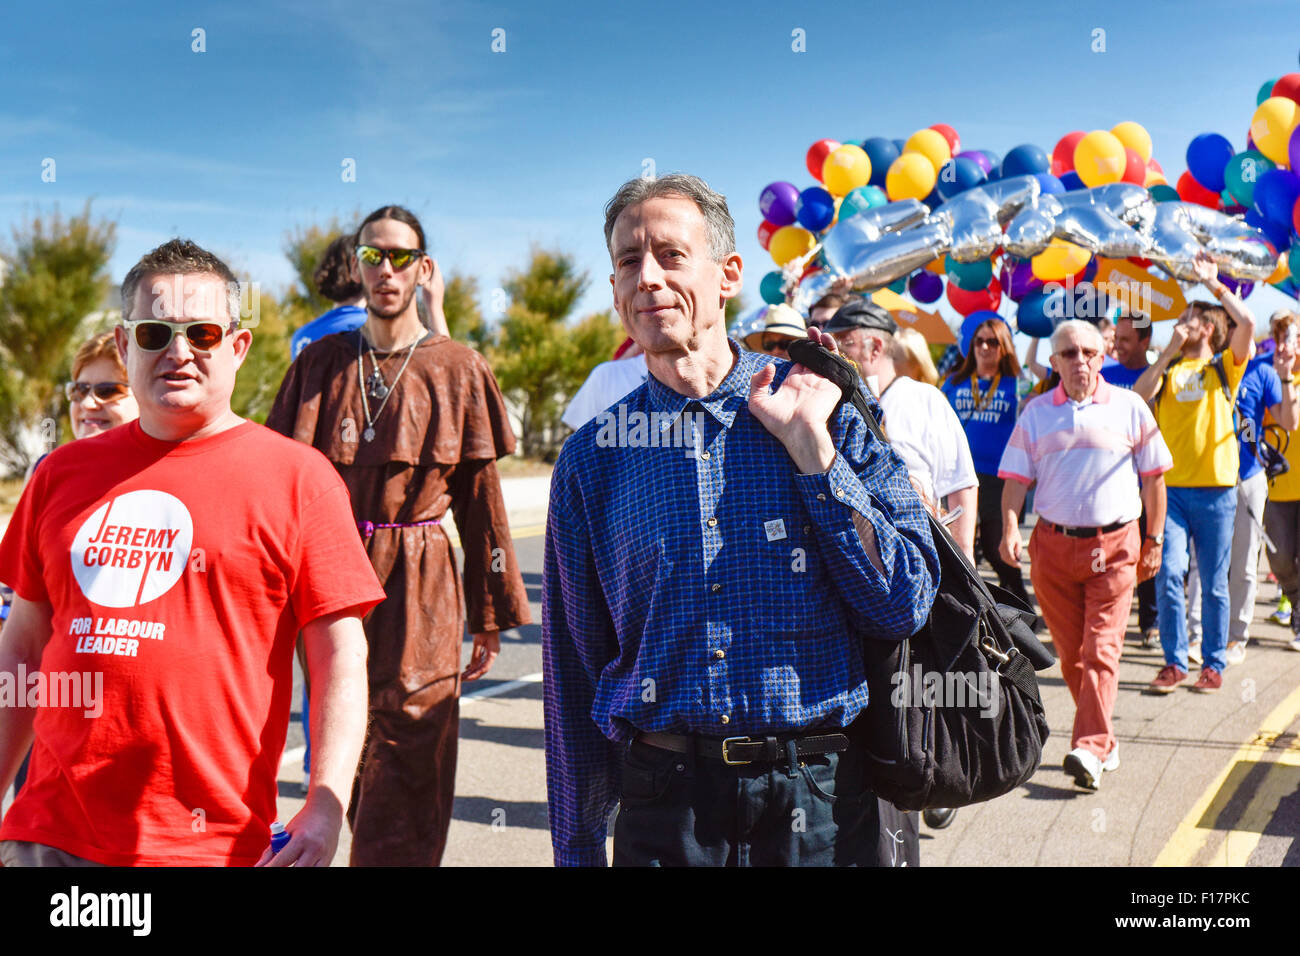 Margate, Kent, UK. 29th August, 2015. Peter Tatchell participates in the Kent Pride celebrations in the seaside town of Margate. Alamy Live News/Photographer: Credit:  Gordon Scammell Stock Photo